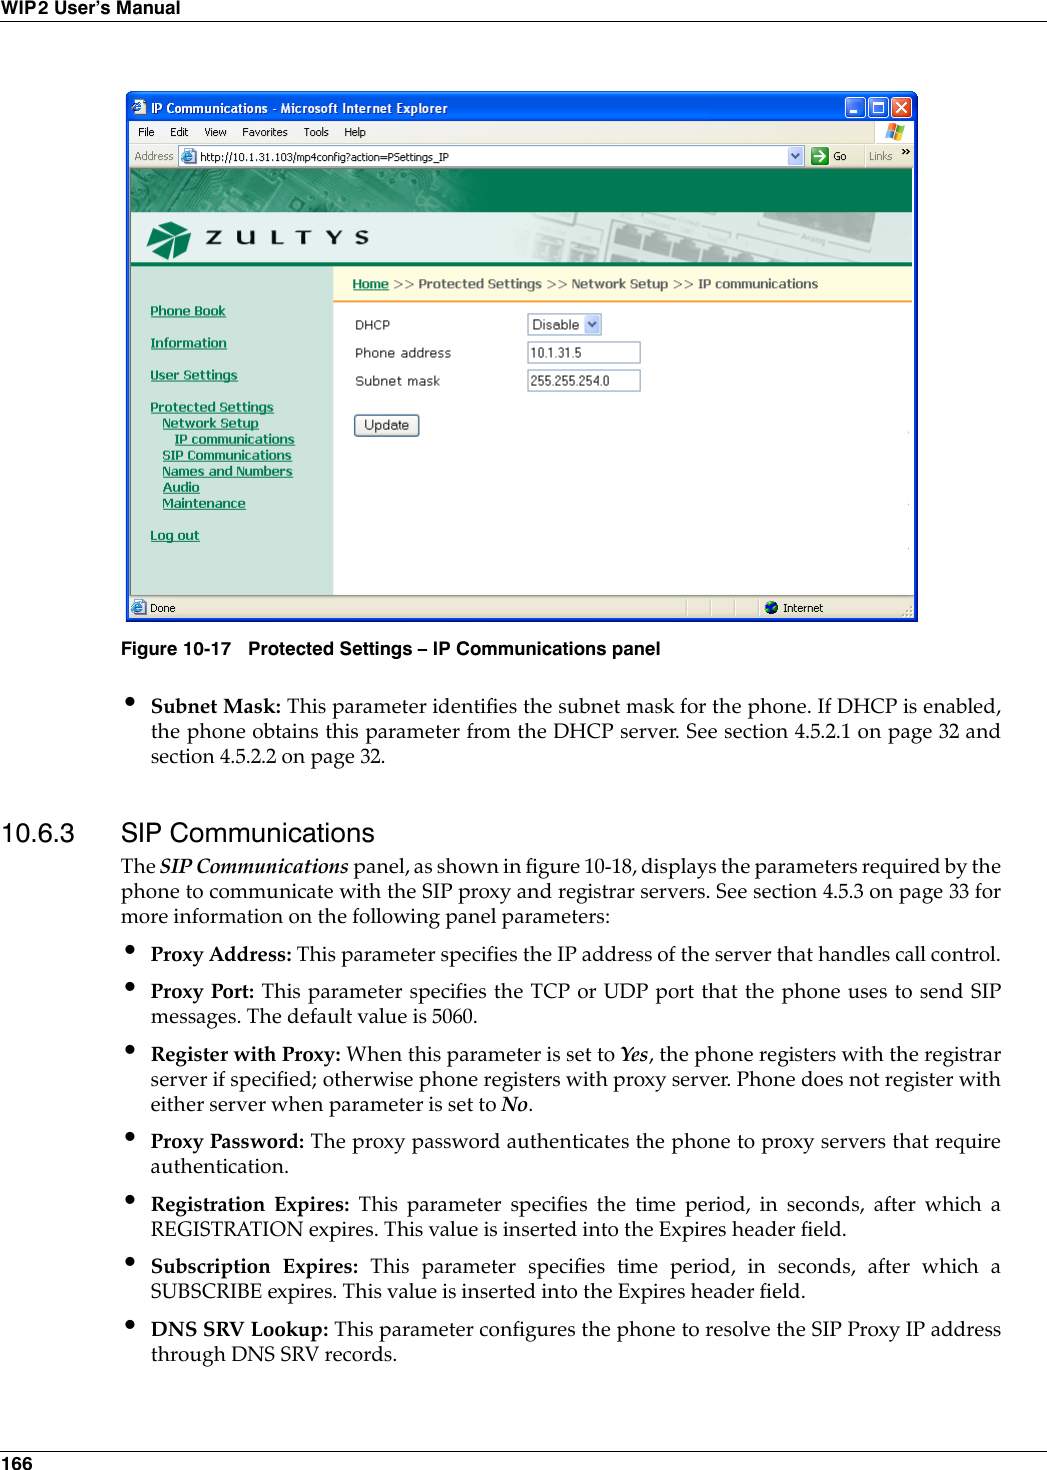 166WIP2 User’s Manual•Subnet Mask: This parameter identifies the subnet mask for the phone. If DHCP is enabled,the phone obtains this parameter from the DHCP server. See section 4.5.2.1 on page 32 andsection 4.5.2.2 on page 32.10.6.3 SIP CommunicationsThe SIP Communications panel, as shown in figure 10-18, displays the parameters required by thephone to communicate with the SIP proxy and registrar servers. See section 4.5.3 on page 33 formore information on the following panel parameters:•Proxy Address: This parameter specifies the IP address of the server that handles call control.•Proxy Port: This parameter specifies the TCP or UDP port that the phone uses to send SIPmessages. The default value is 5060.•Register with Proxy: When this parameter is set to Yes, the phone registers with the registrarserver if specified; otherwise phone registers with proxy server. Phone does not register witheither server when parameter is set to No.•Proxy Password: The proxy password authenticates the phone to proxy servers that requireauthentication. •Registration Expires: This parameter specifies the time period, in seconds, after which aREGISTRATION expires. This value is inserted into the Expires header field.•Subscription Expires: This parameter specifies time period, in seconds, after which aSUBSCRIBE expires. This value is inserted into the Expires header field.•DNS SRV Lookup: This parameter configures the phone to resolve the SIP Proxy IP addressthrough DNS SRV records.Figure 10-17 Protected Settings – IP Communications panel